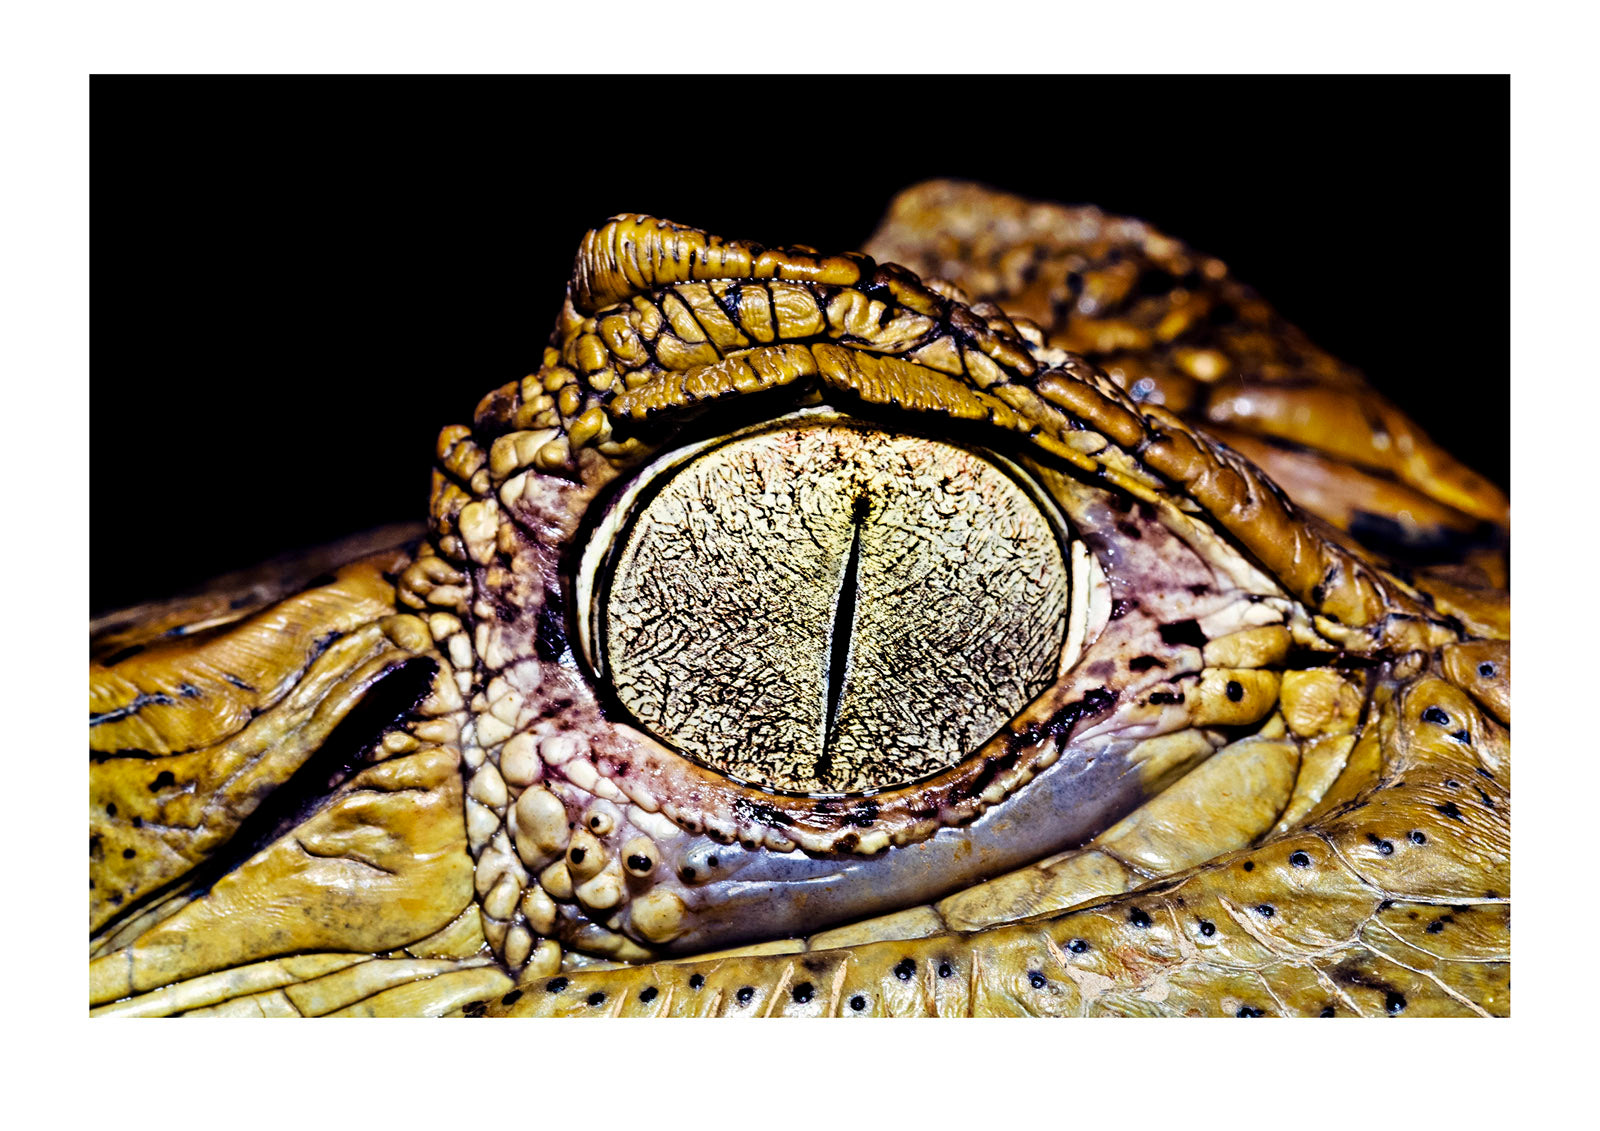 The textured and leathery scales on the skin surround the eye of a Black Caiman. Amazon River, Amazon Basin, Loreto Region, Maynas Province, Peru.